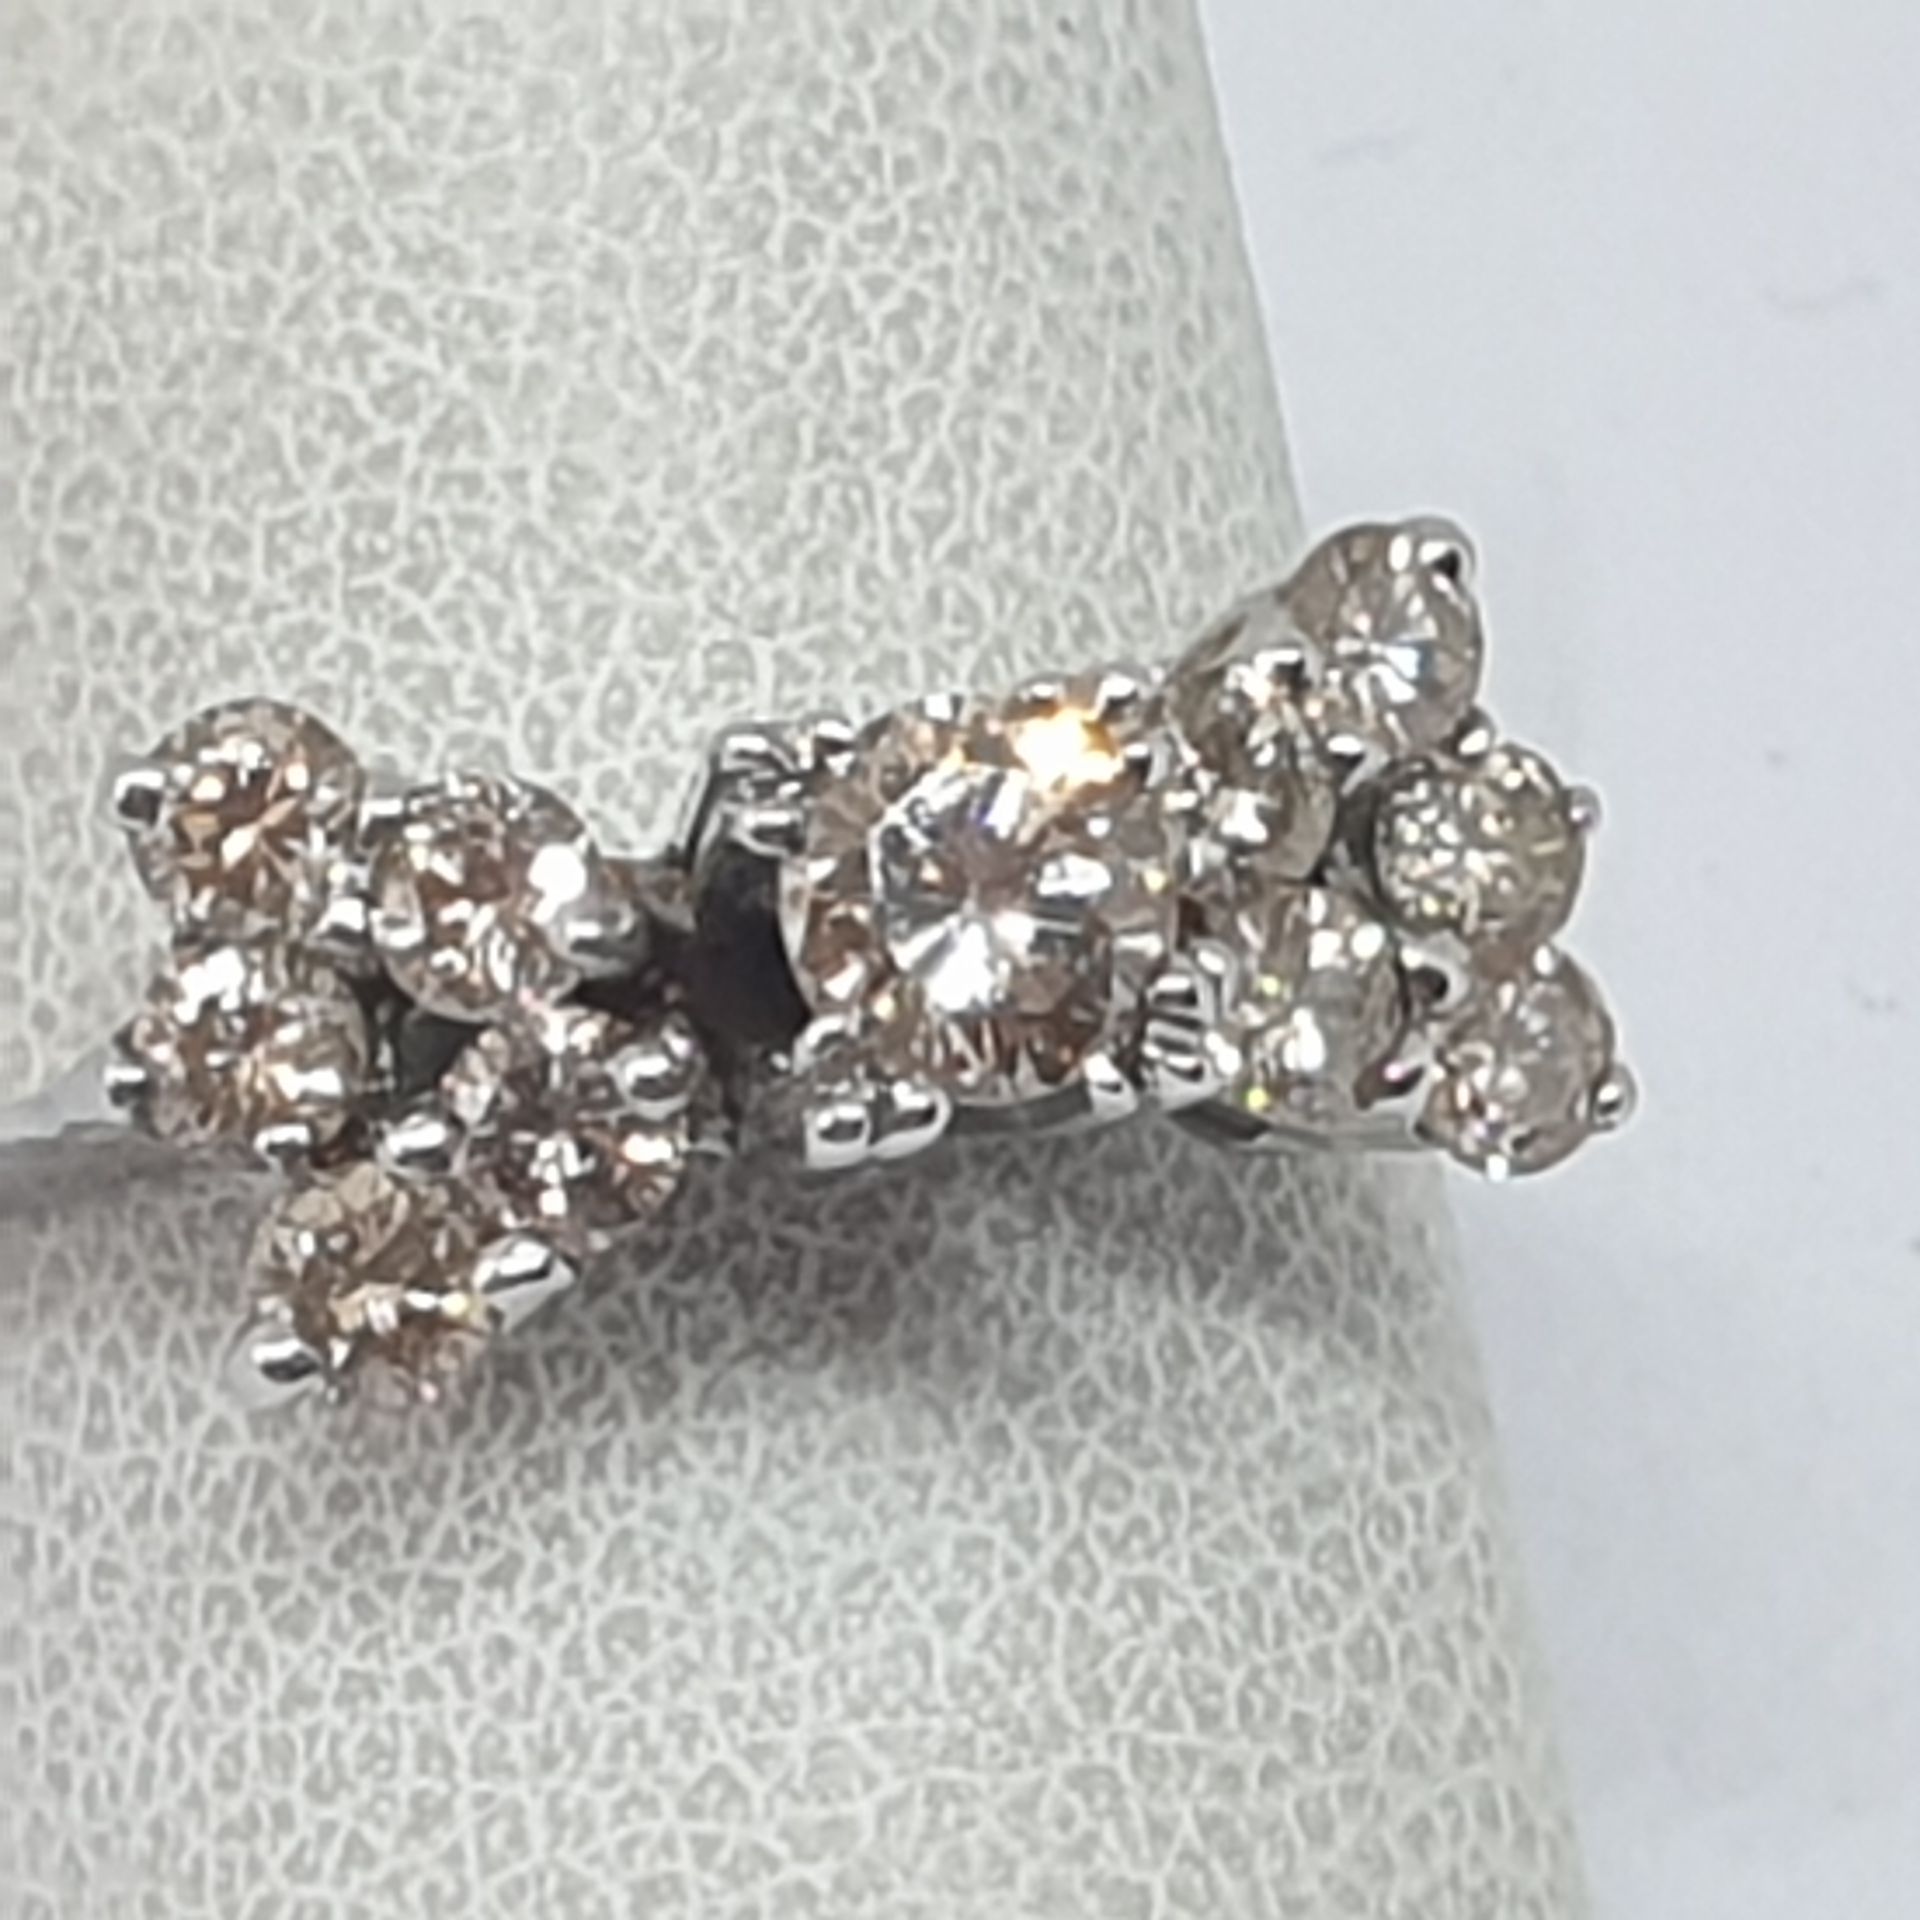 18 KT GOLD RING, 4.3 GRAMS WITH CENTRAL DIAMOND 0.40 CT AND LATERAL DIAMONDS COLOR CHAMPAGNE 0.70 CT